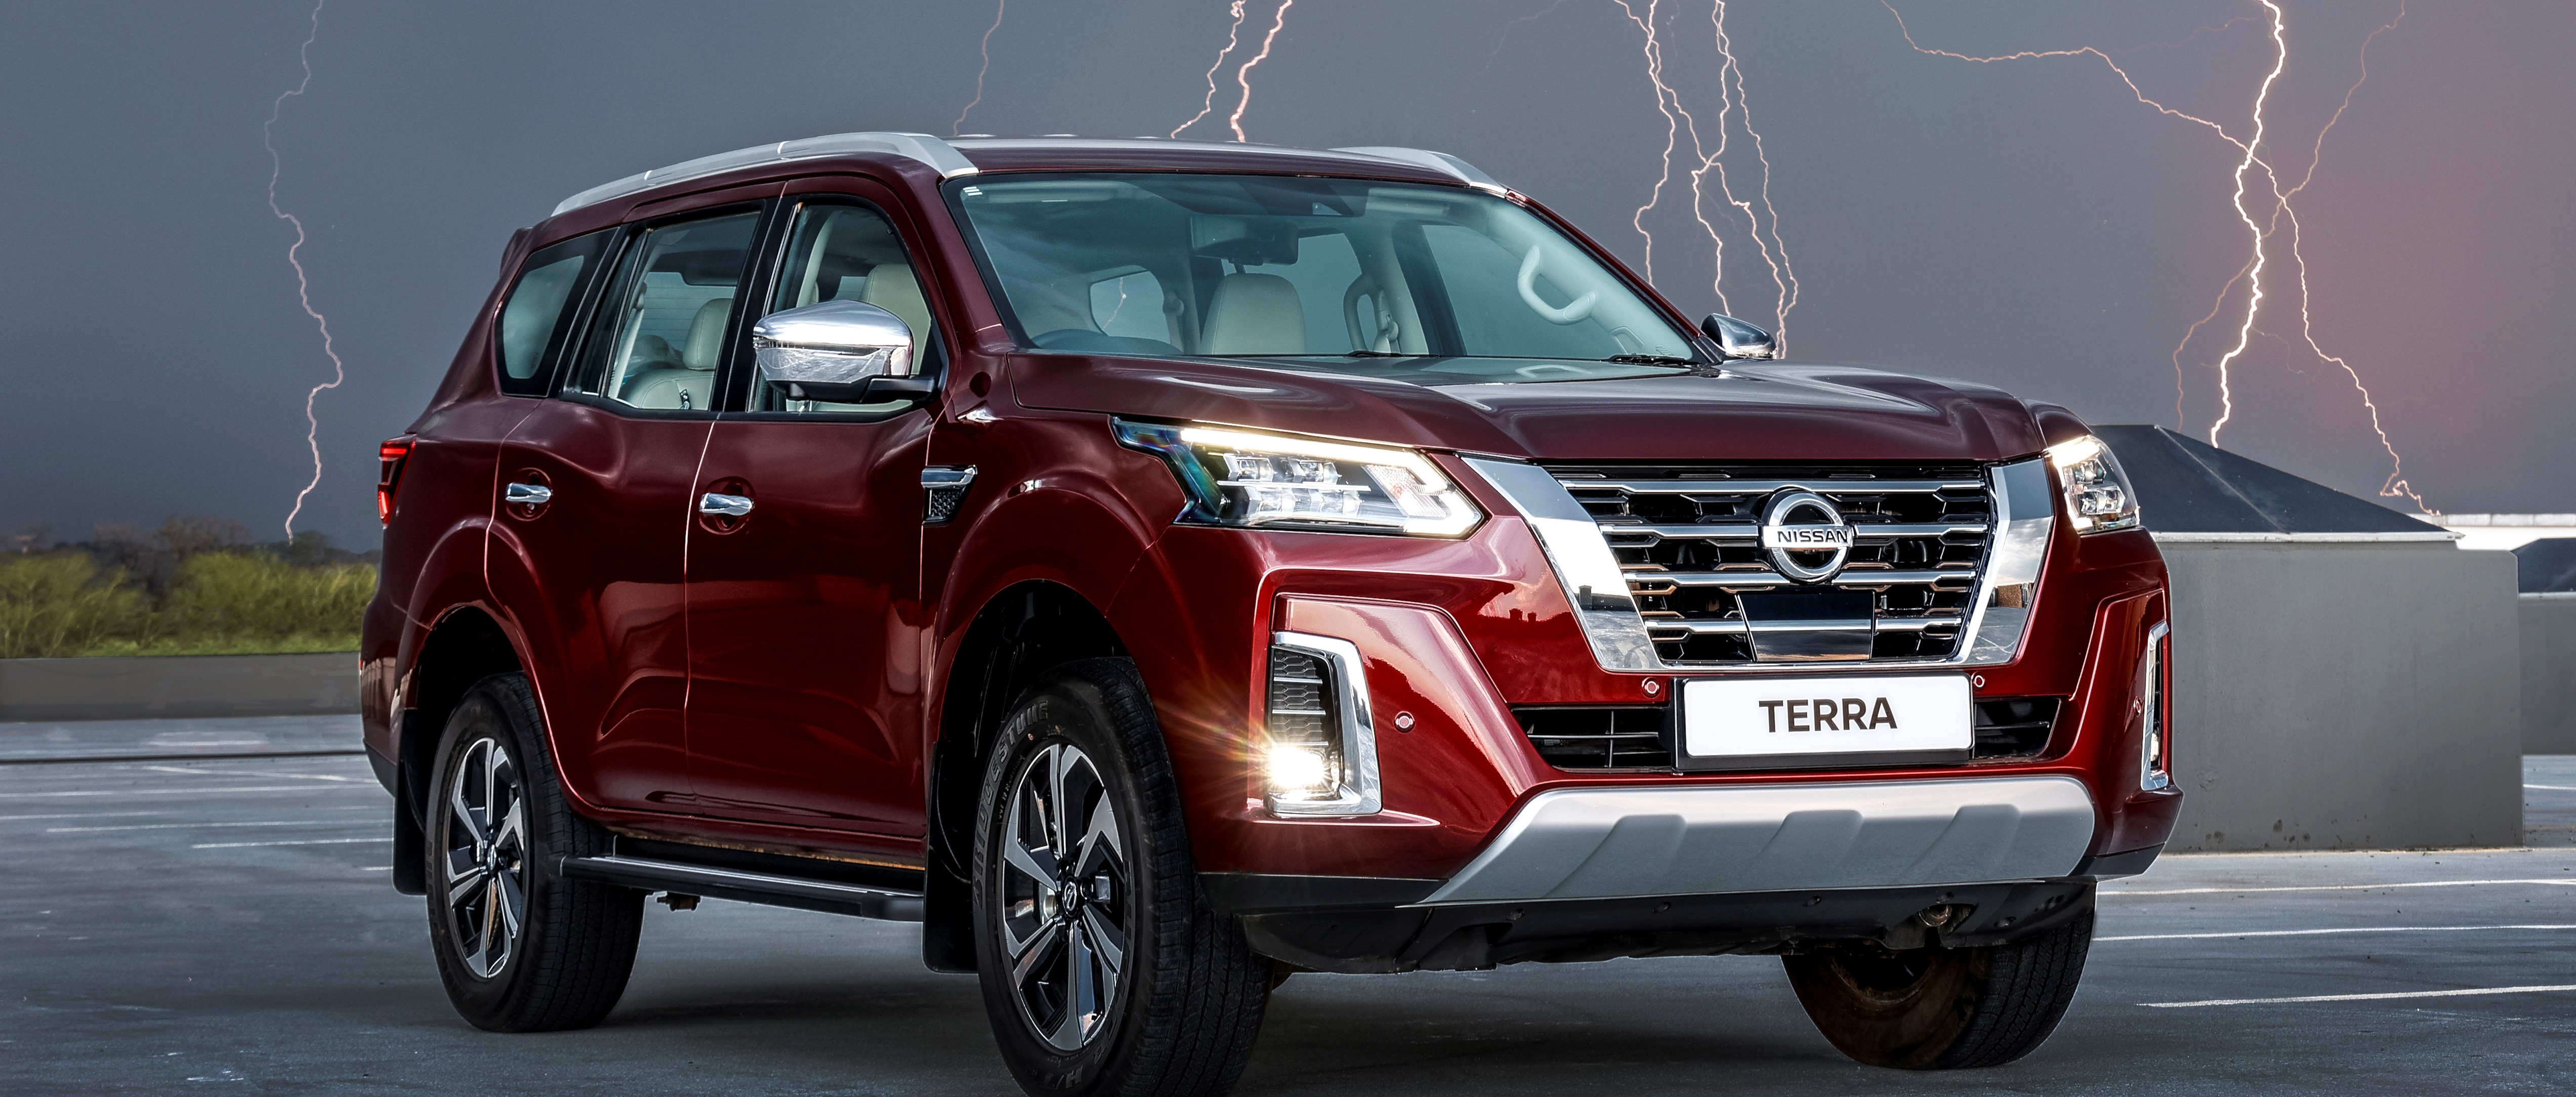 All-New Nissan Terra expands SUV line-up in Angola